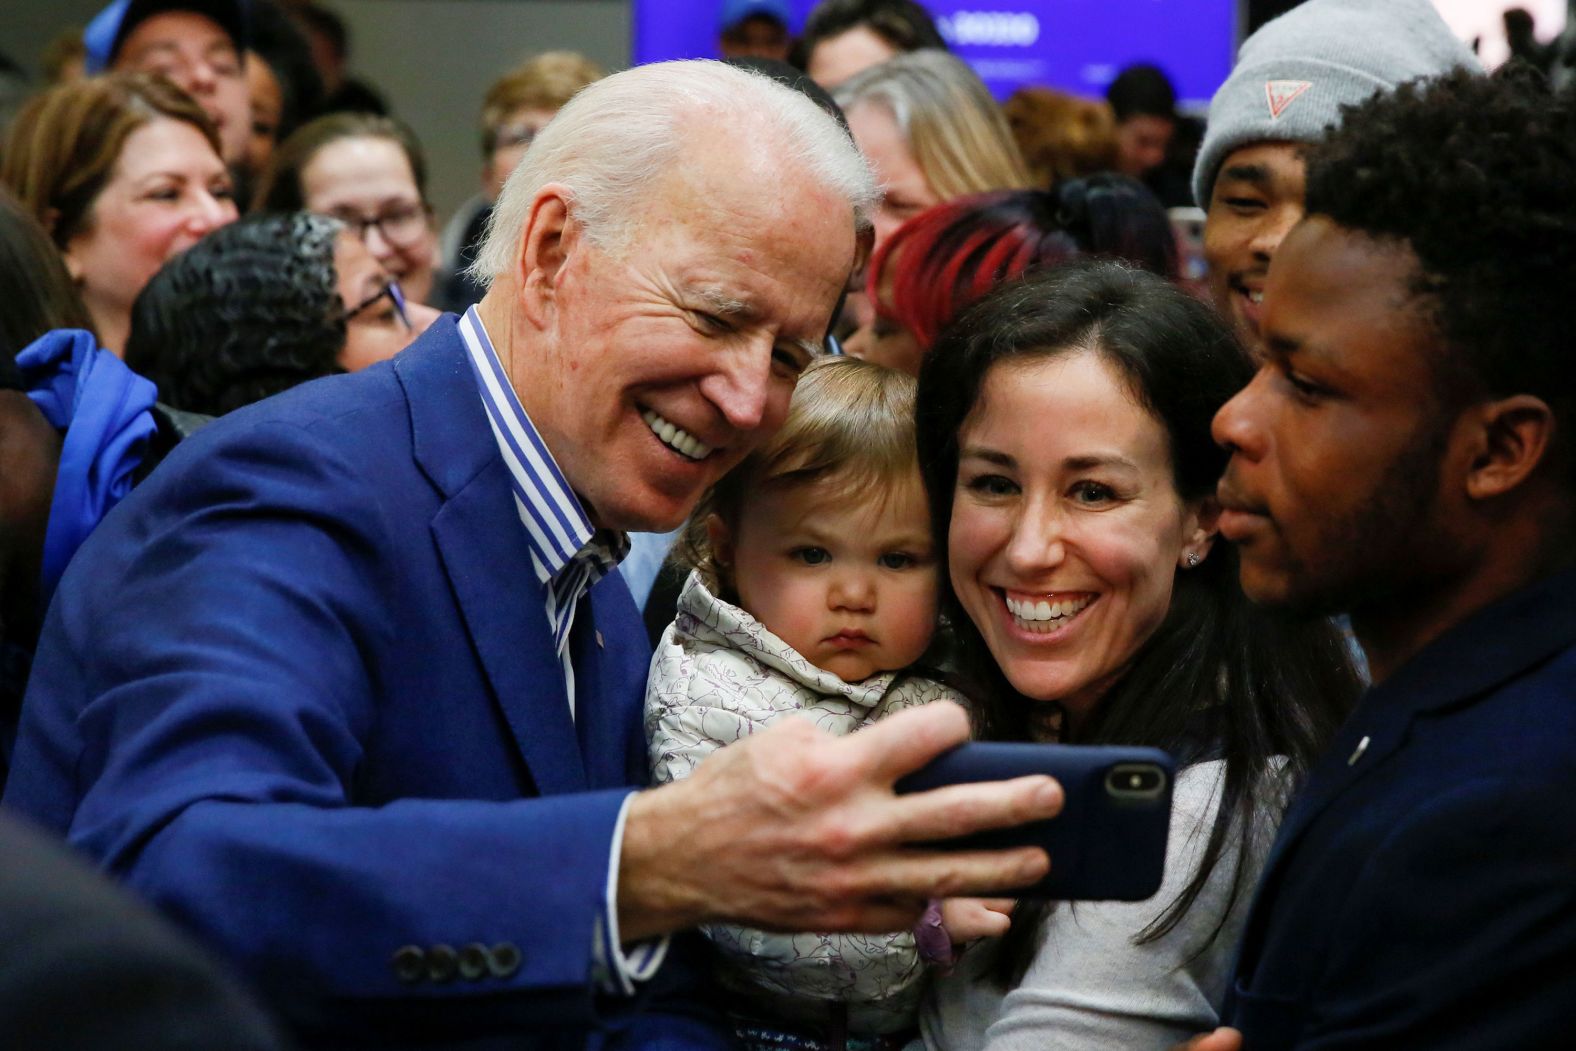 Biden takes photos with audience members at the end of a campaign event in Raleigh, North Carolina, on Saturday.